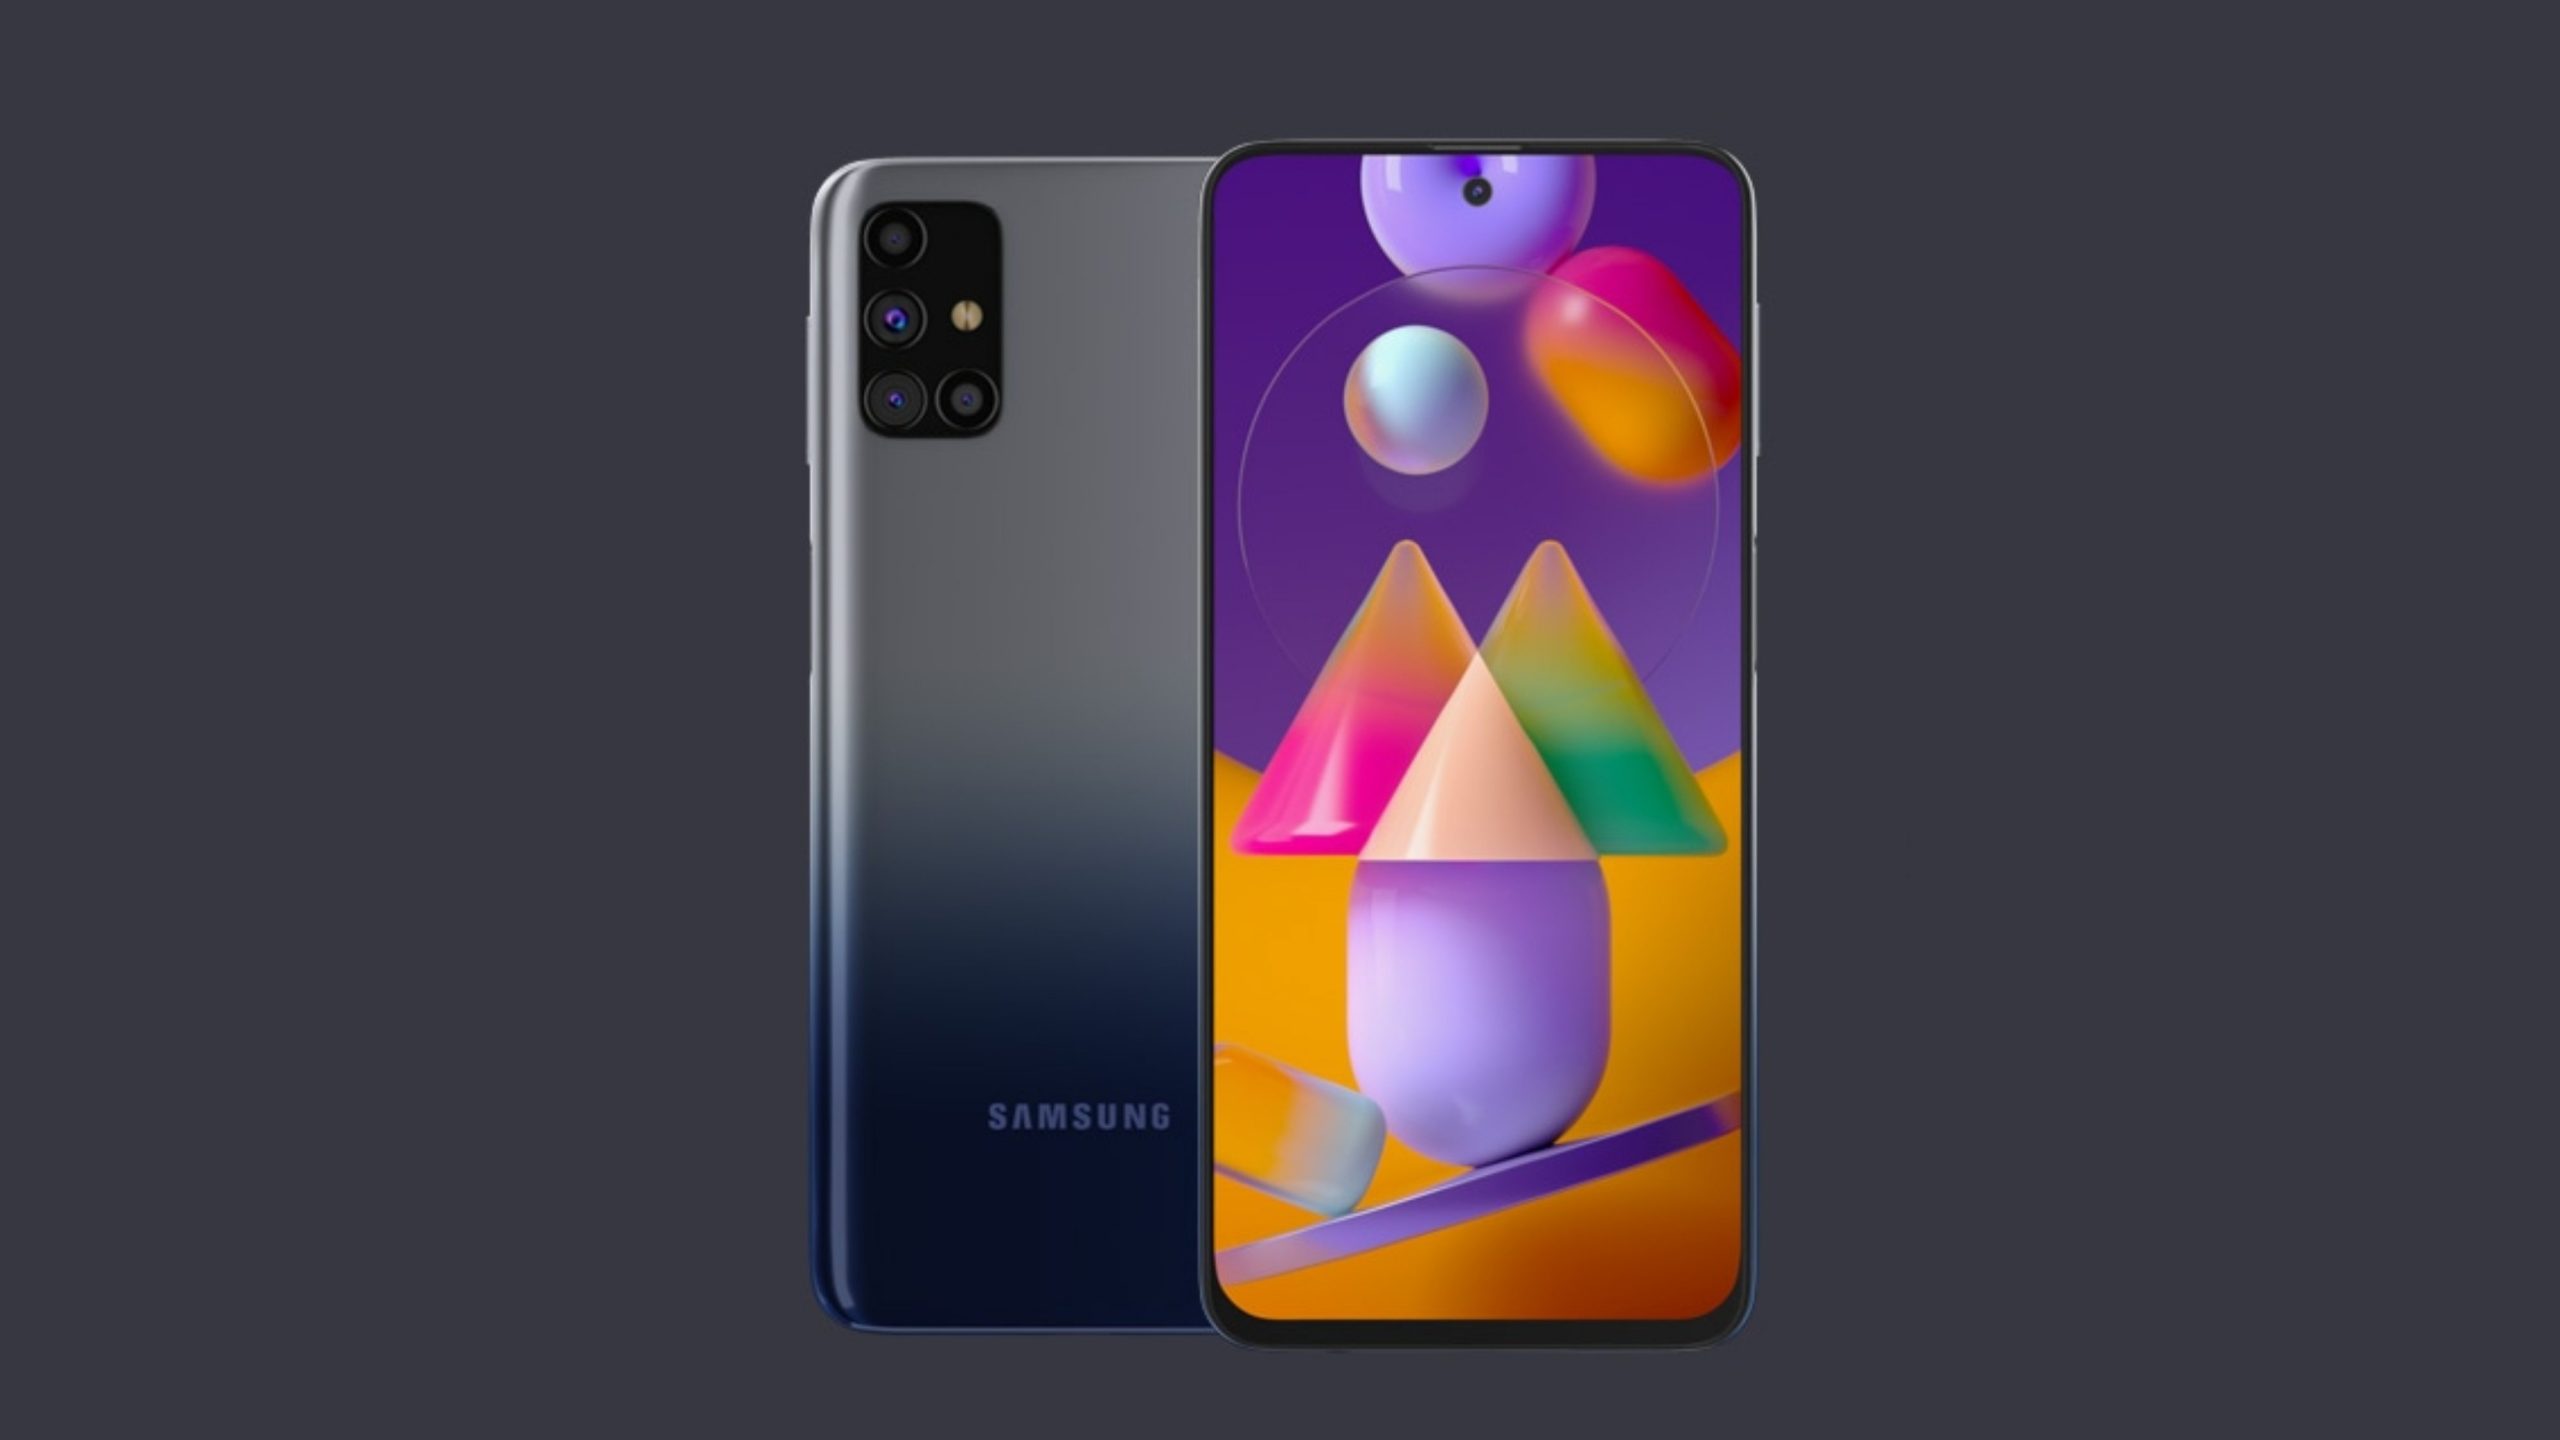 Samsung Galaxy M31s has begun to receive One UI Core 3.0 (Android 11) update